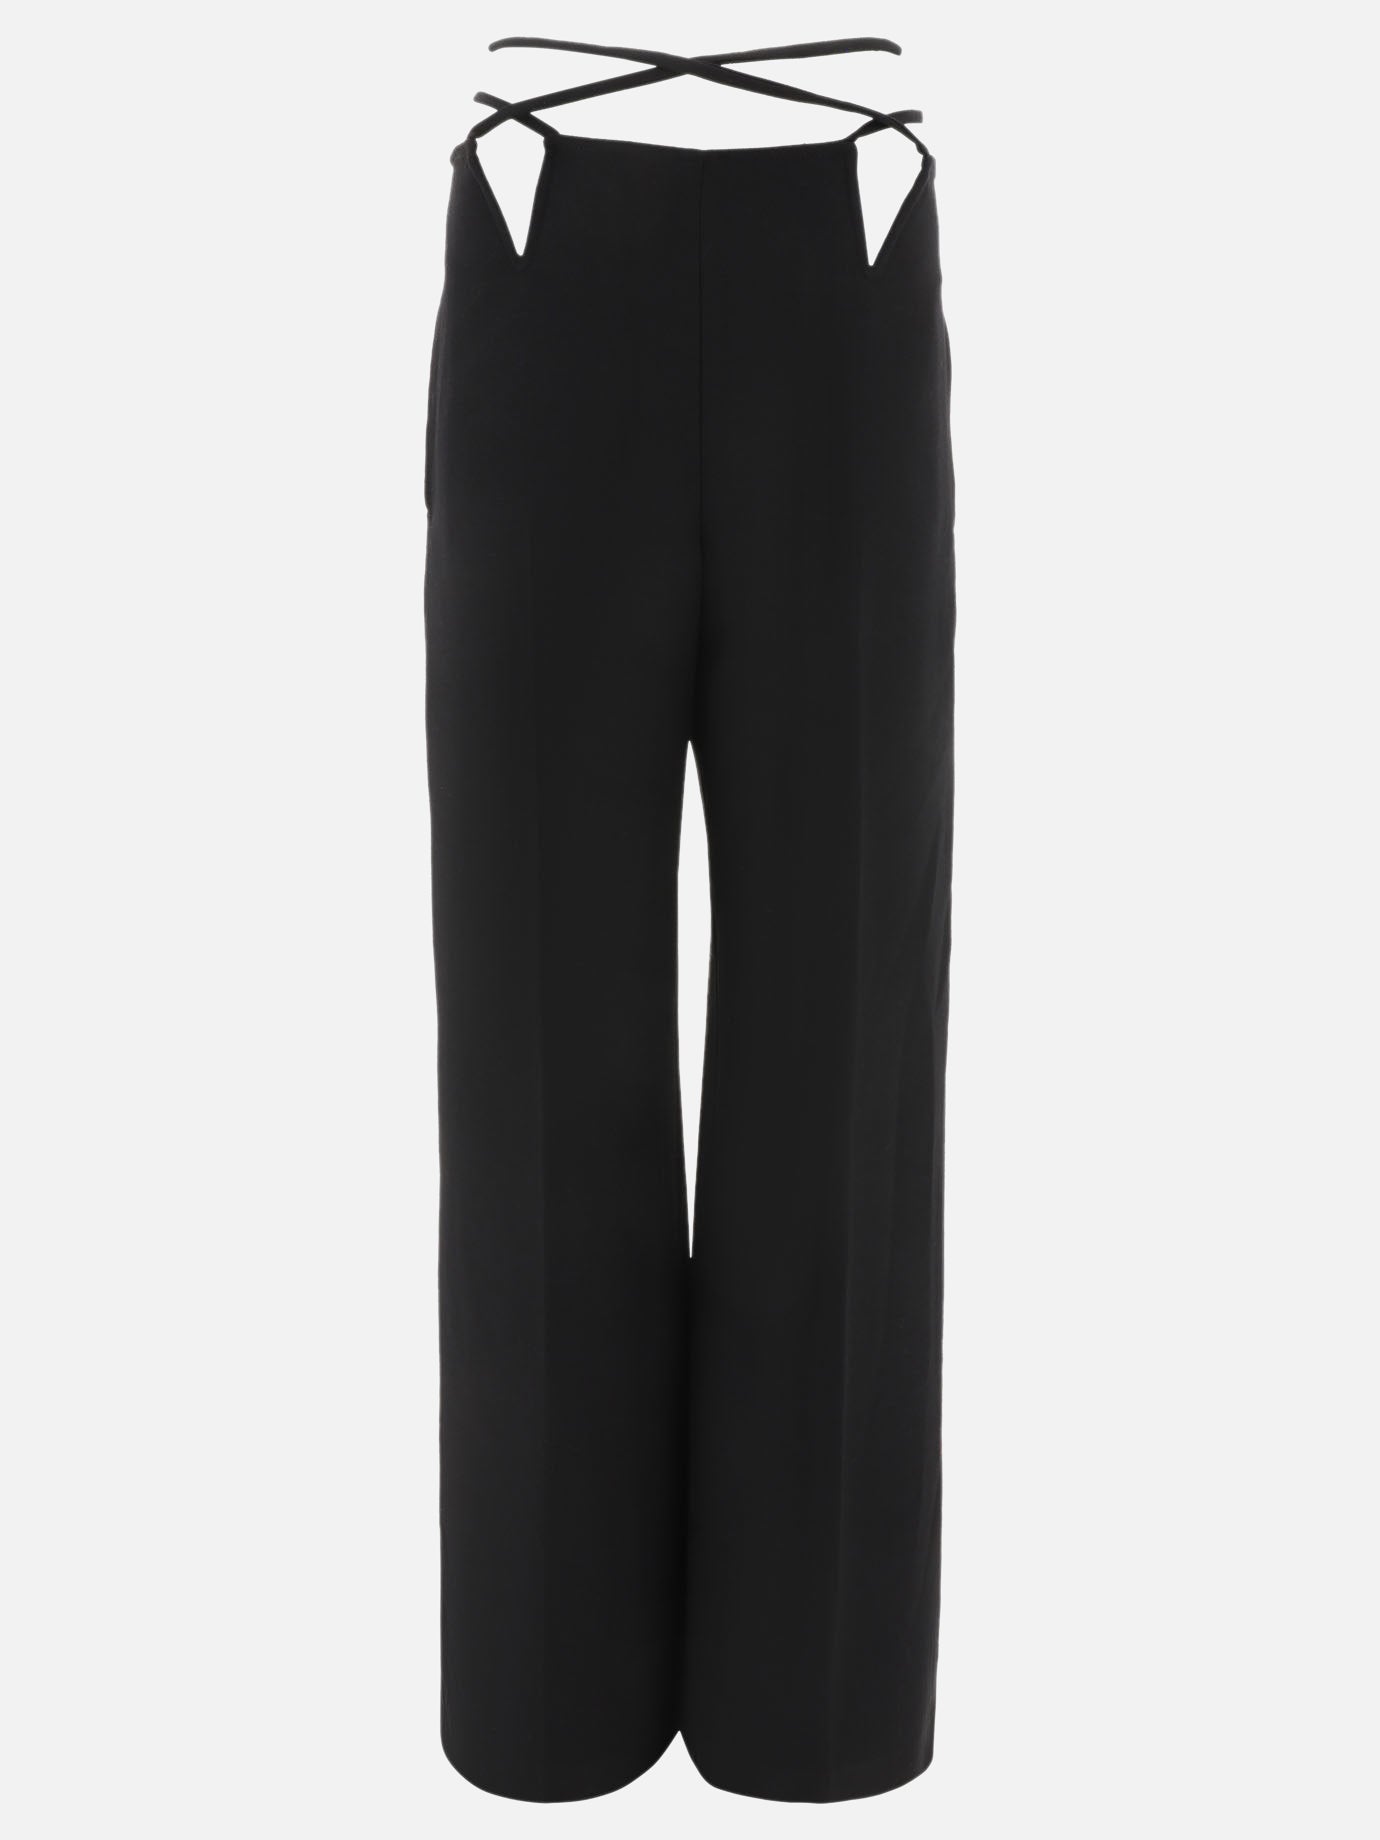 "V-Wire" trousers